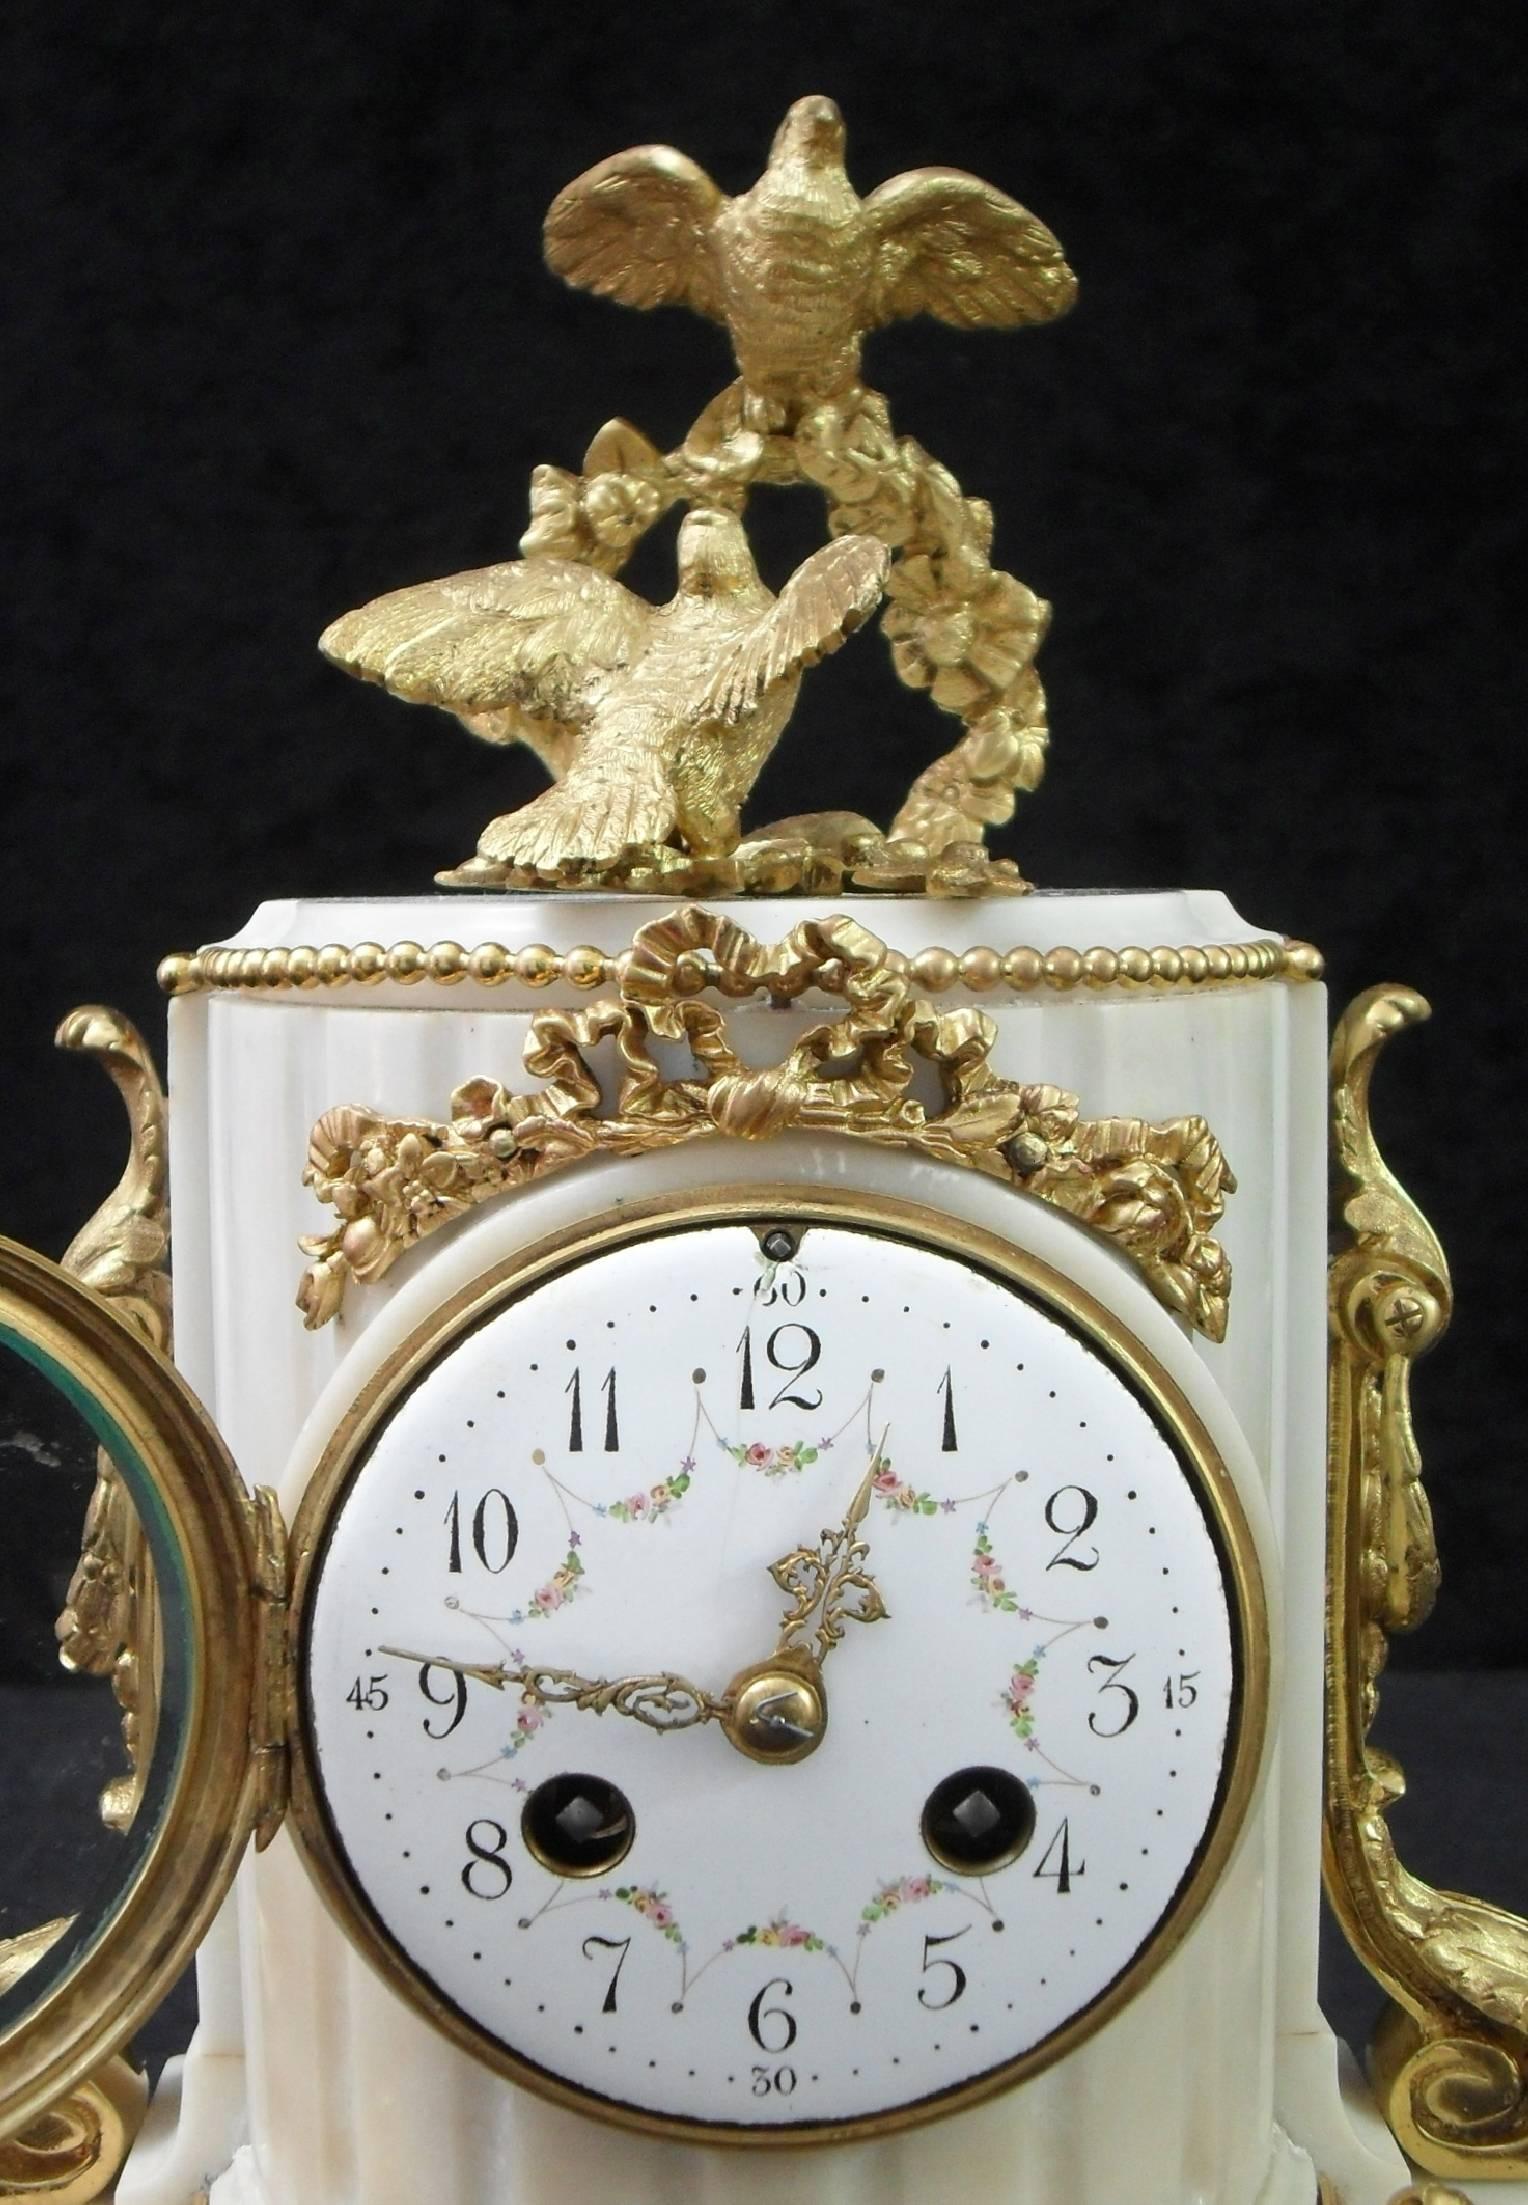 A very good quality white marble mantel clock with decorative ribbon and floral bronze gilt ormolu mounts surmounted by two doves. The clock has a white enamel dial with painted detail and an eight day French movement which strikes the hours and